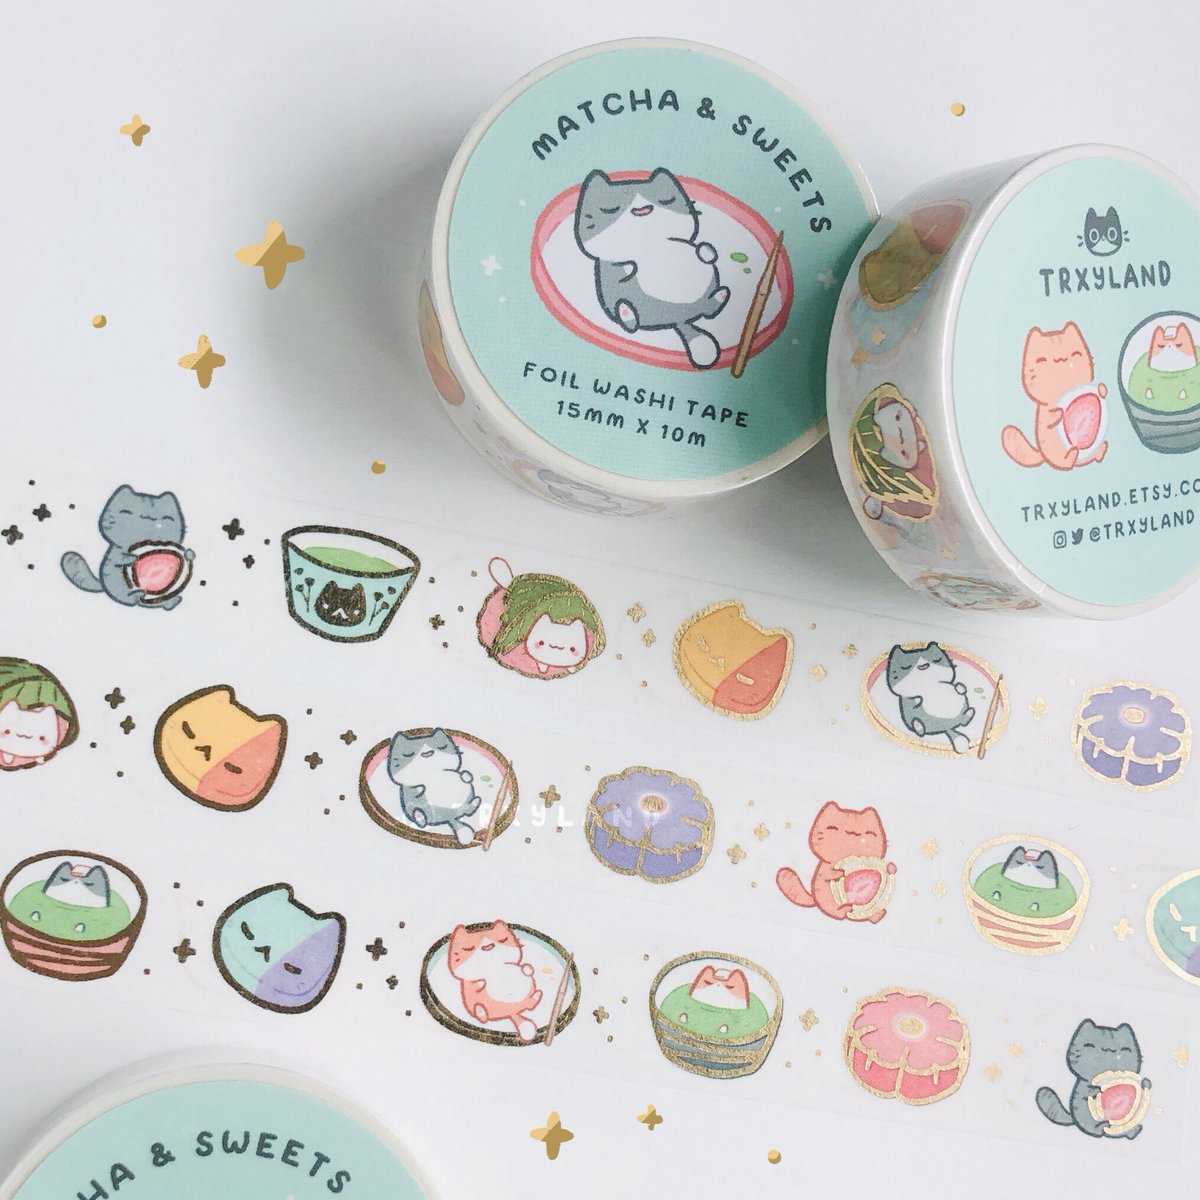 New pins & washi are now available in my shop! ✨https://t.co/H5lVzOEUkm✨

? There are limited bundles available for the Toilet Kitties series 

? Non-launch items are 10% off for one week (until May 30)!

Happy shopping! RTs are much appreciated ☺️? 